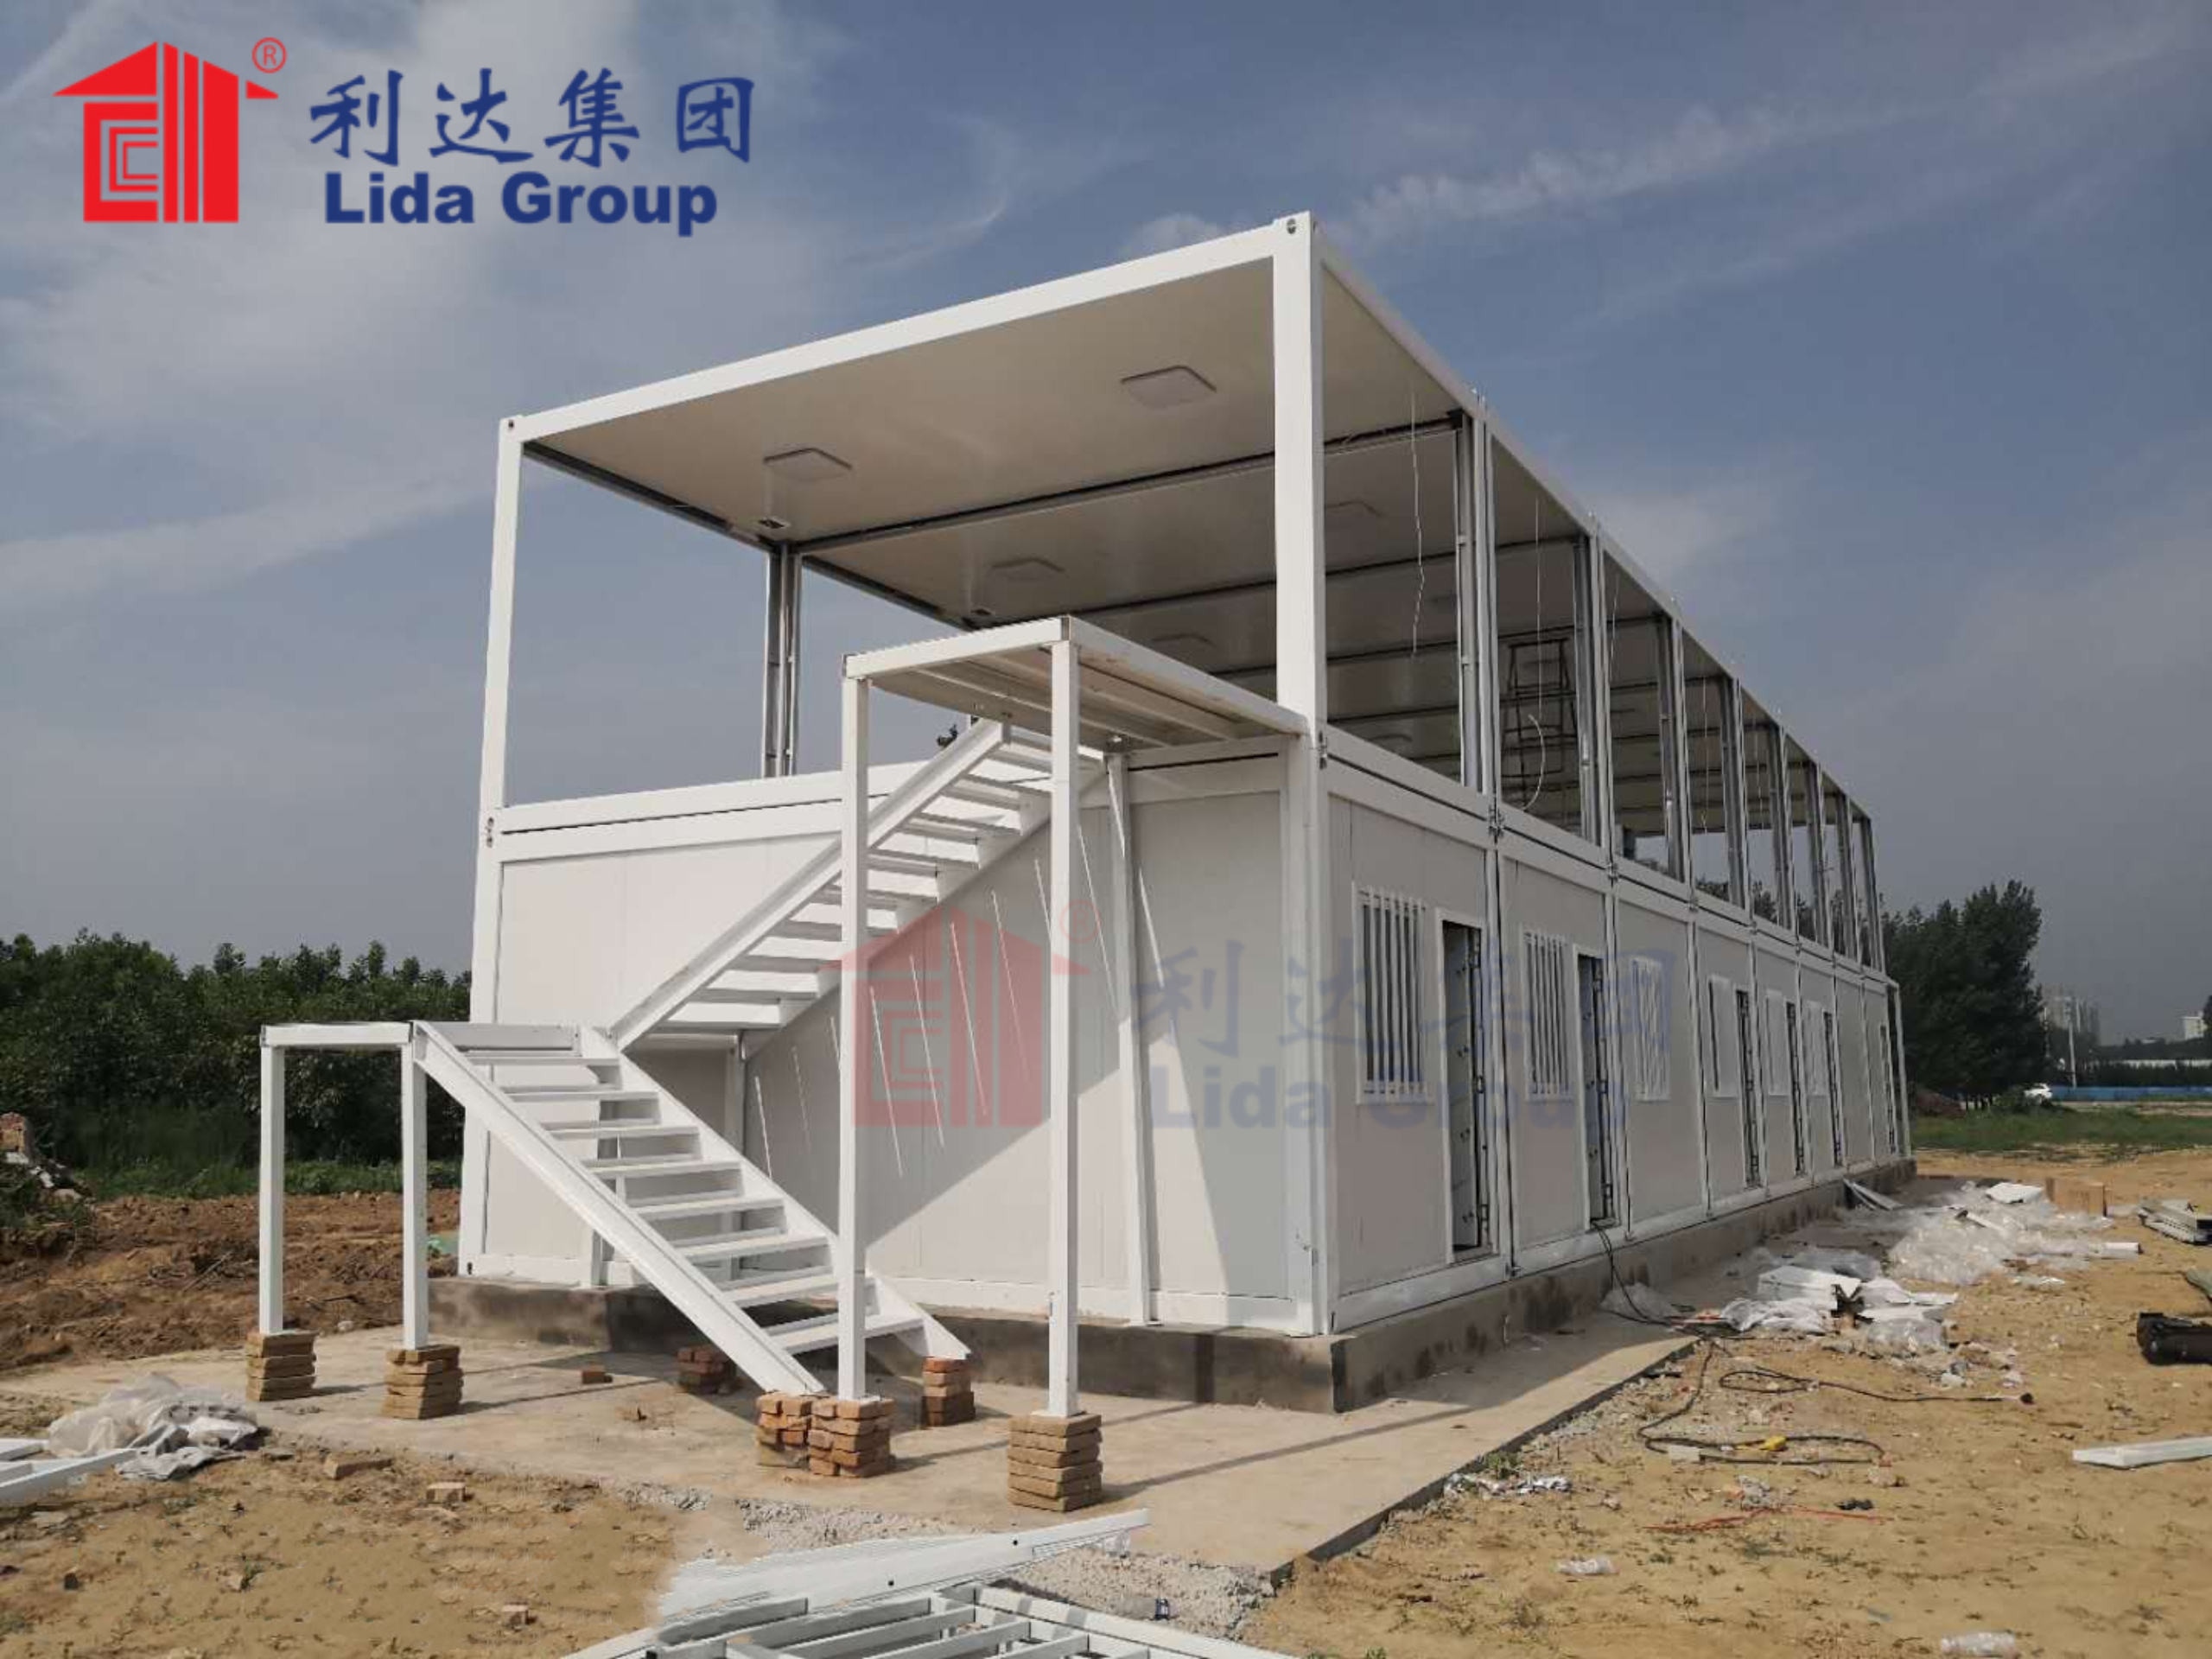 Chinese construction firm Lida Group expands into global markets with container apartment and prefab housing division, sees growing demand for modular and mobile living spaces.